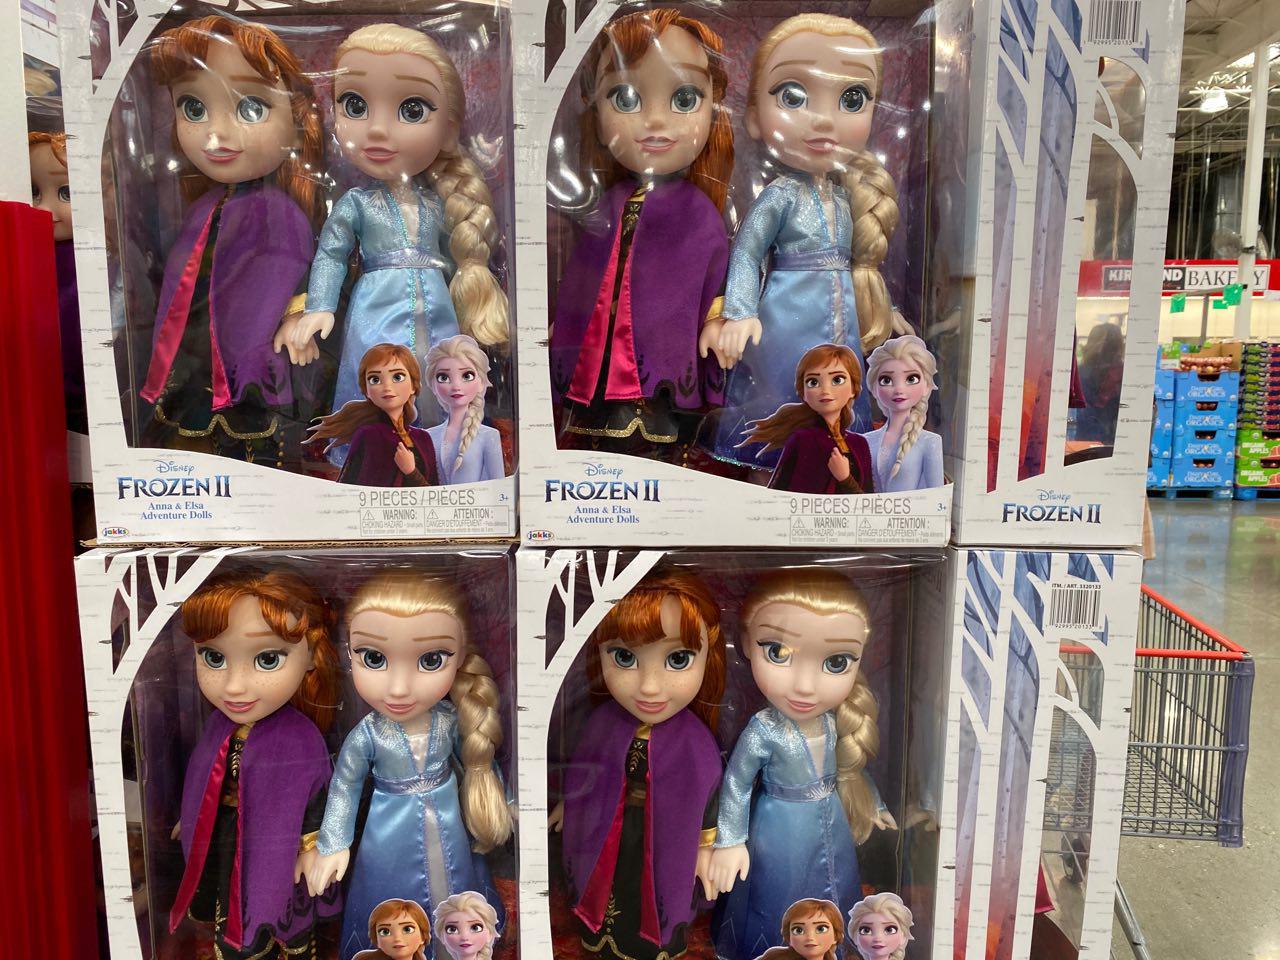 Frozen 2 Holiday Deals at Costco